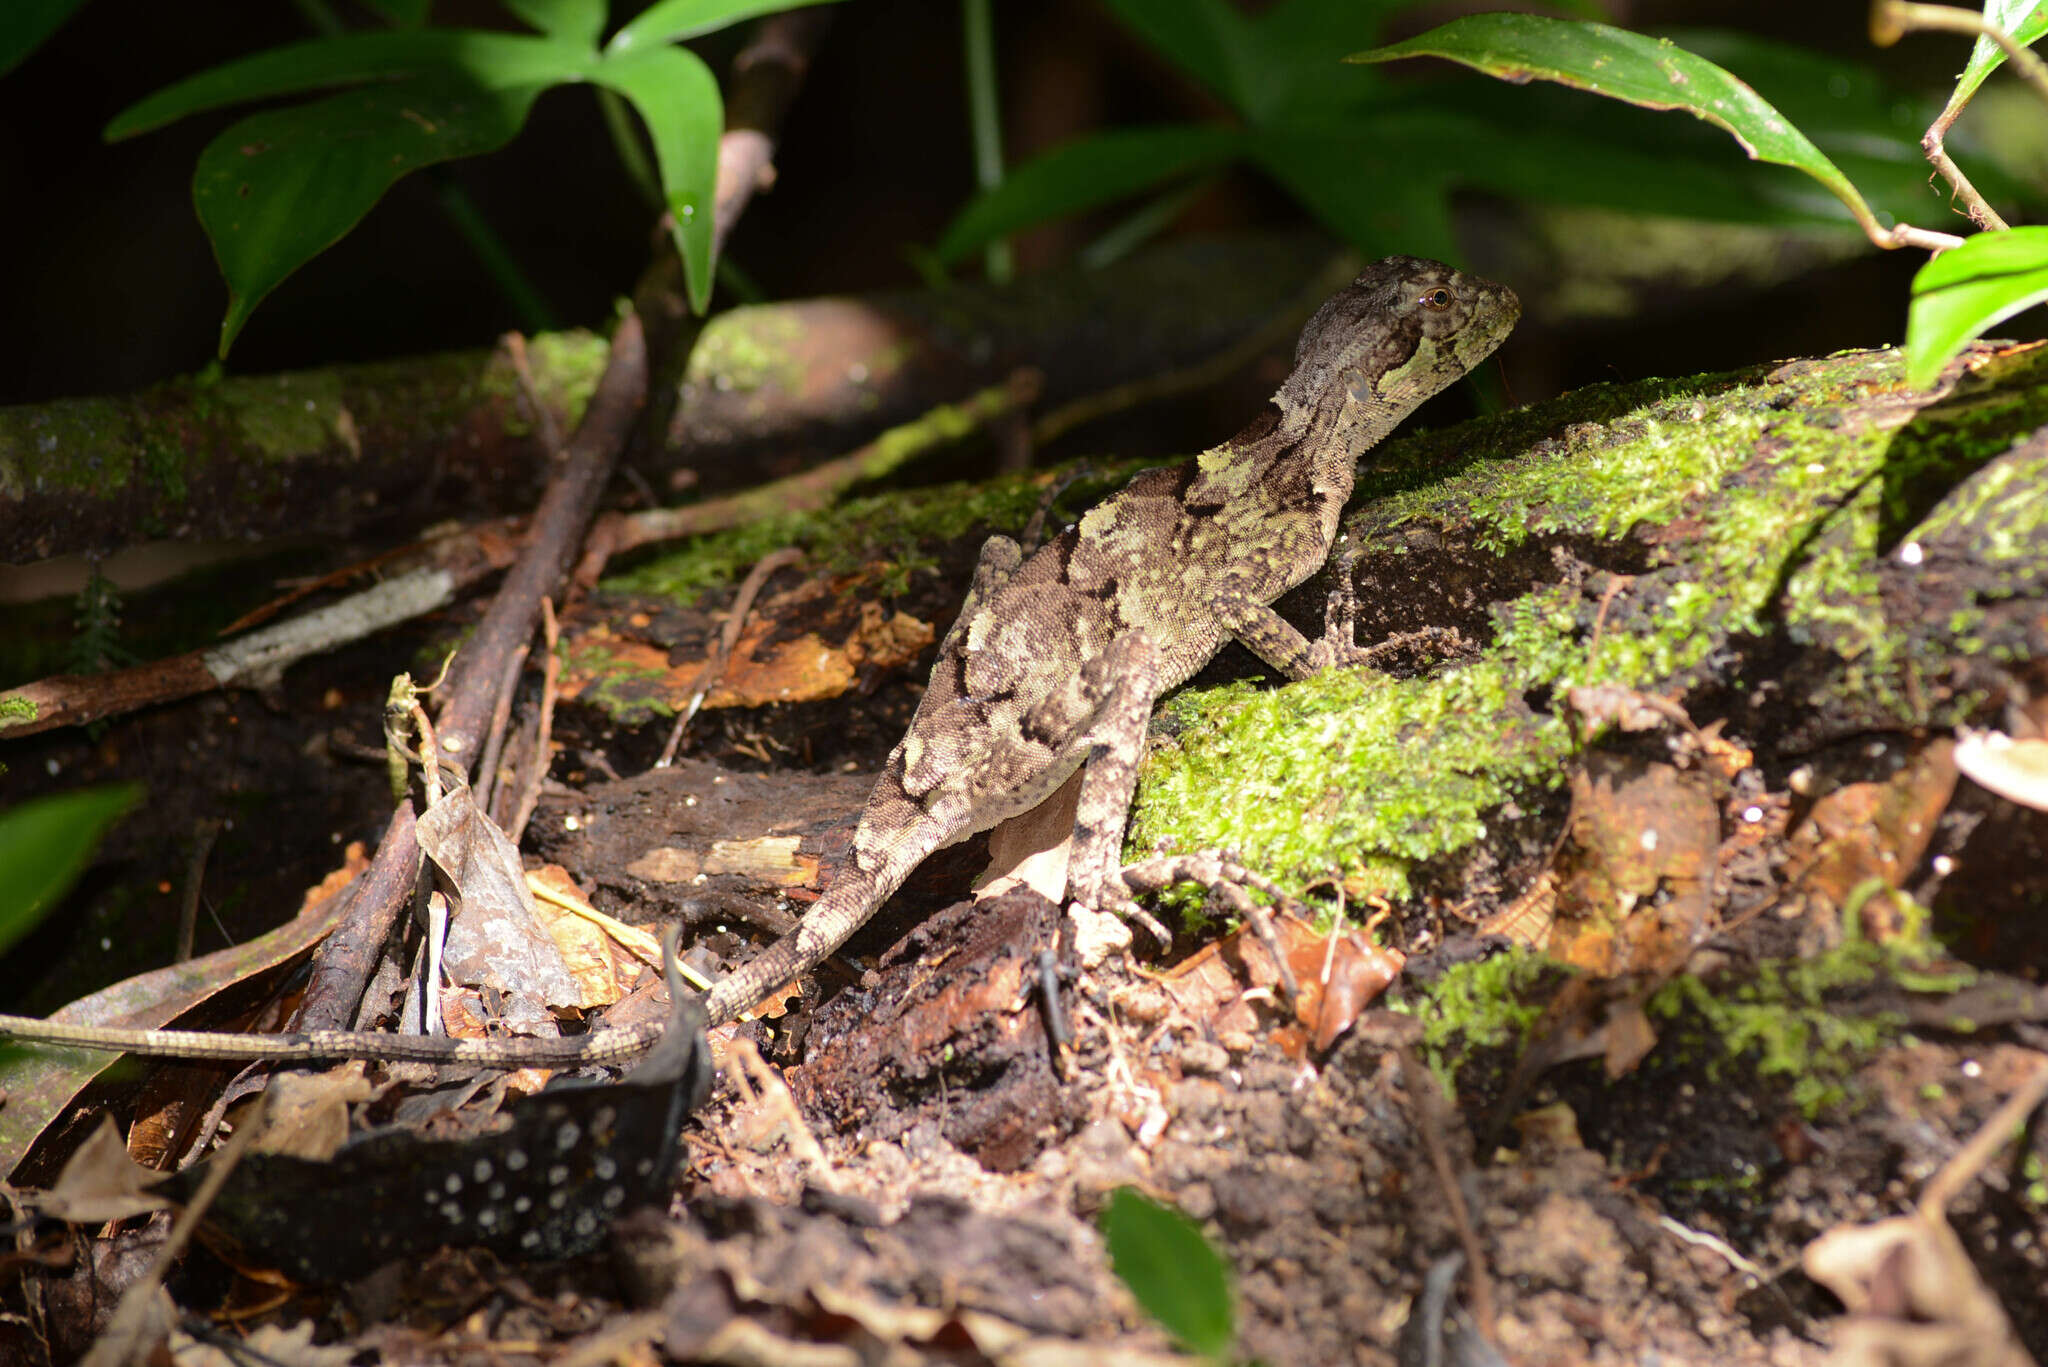 Image of Wied's Fathead Anole